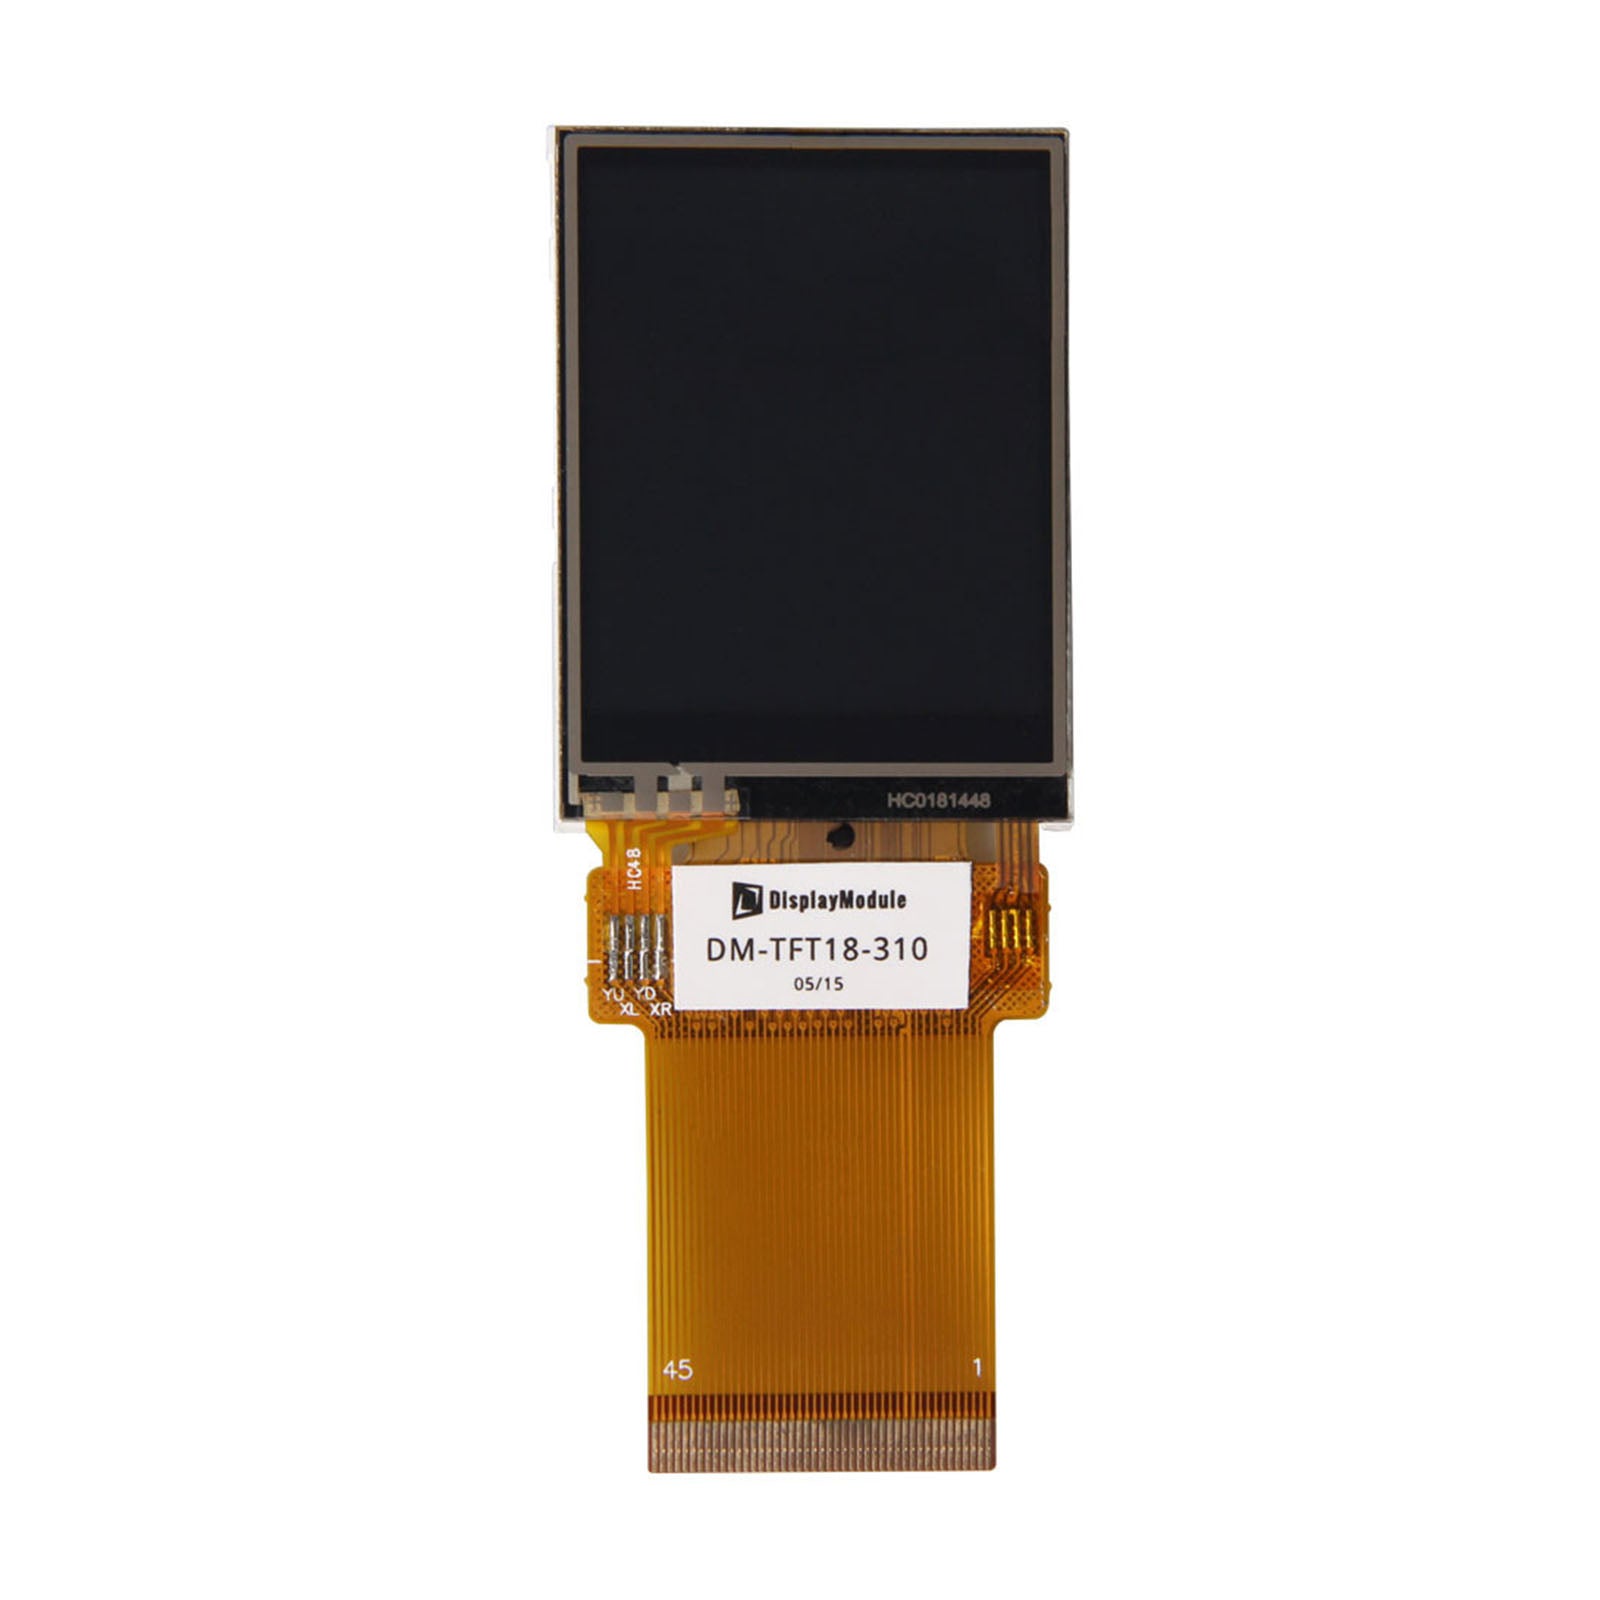 DisplayModule 1.8" 128x160 TFT LCD Display Panel With Resistive Touch - SPI, MCU, RGB